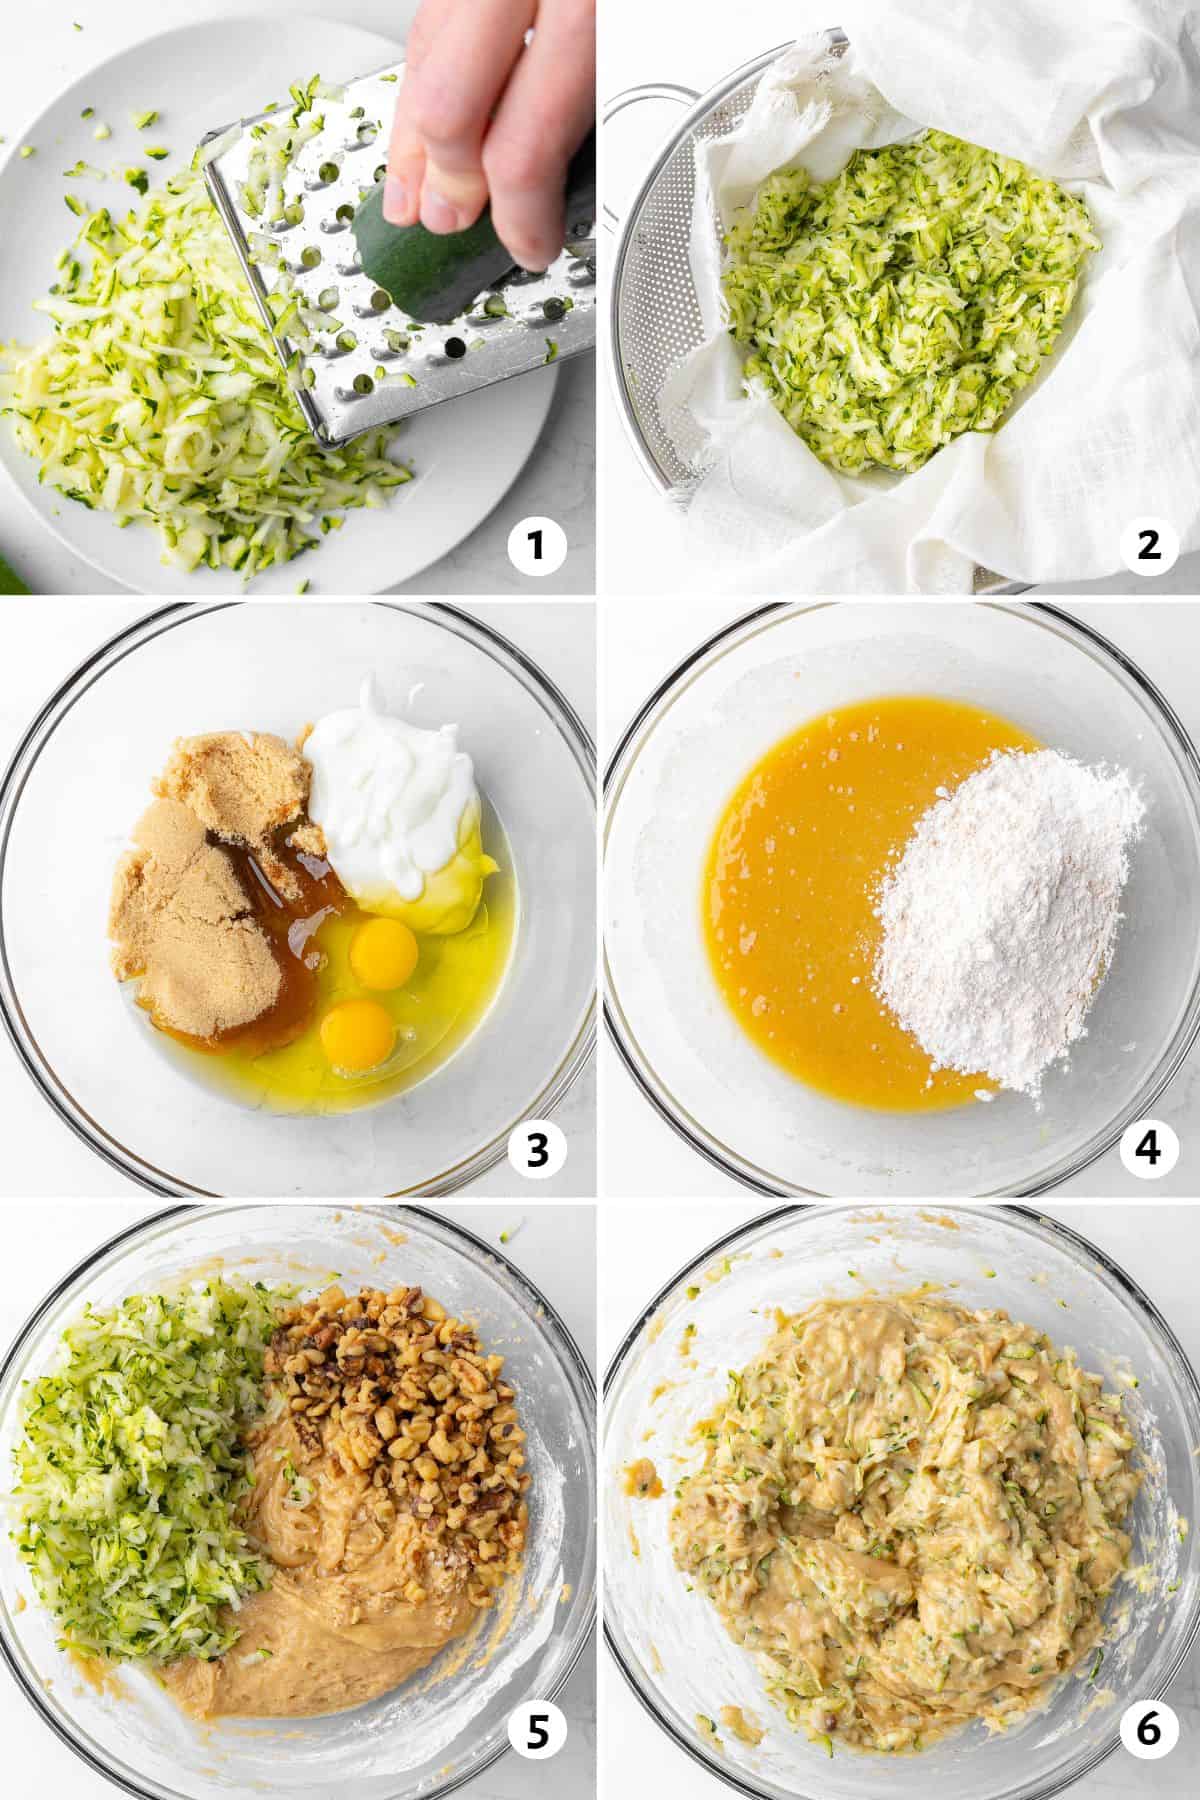 6 image collage making batter: 1- grating zucchini with a box grater on to a plate, 2- grated zucchini on top of towel in a mesh strainer, 3- wet ingredients added to a bowl, 4- after mixing with dry ingredients added, 5- batter with walnuts and drained grated zucchini added, 6- batter after fully combined.